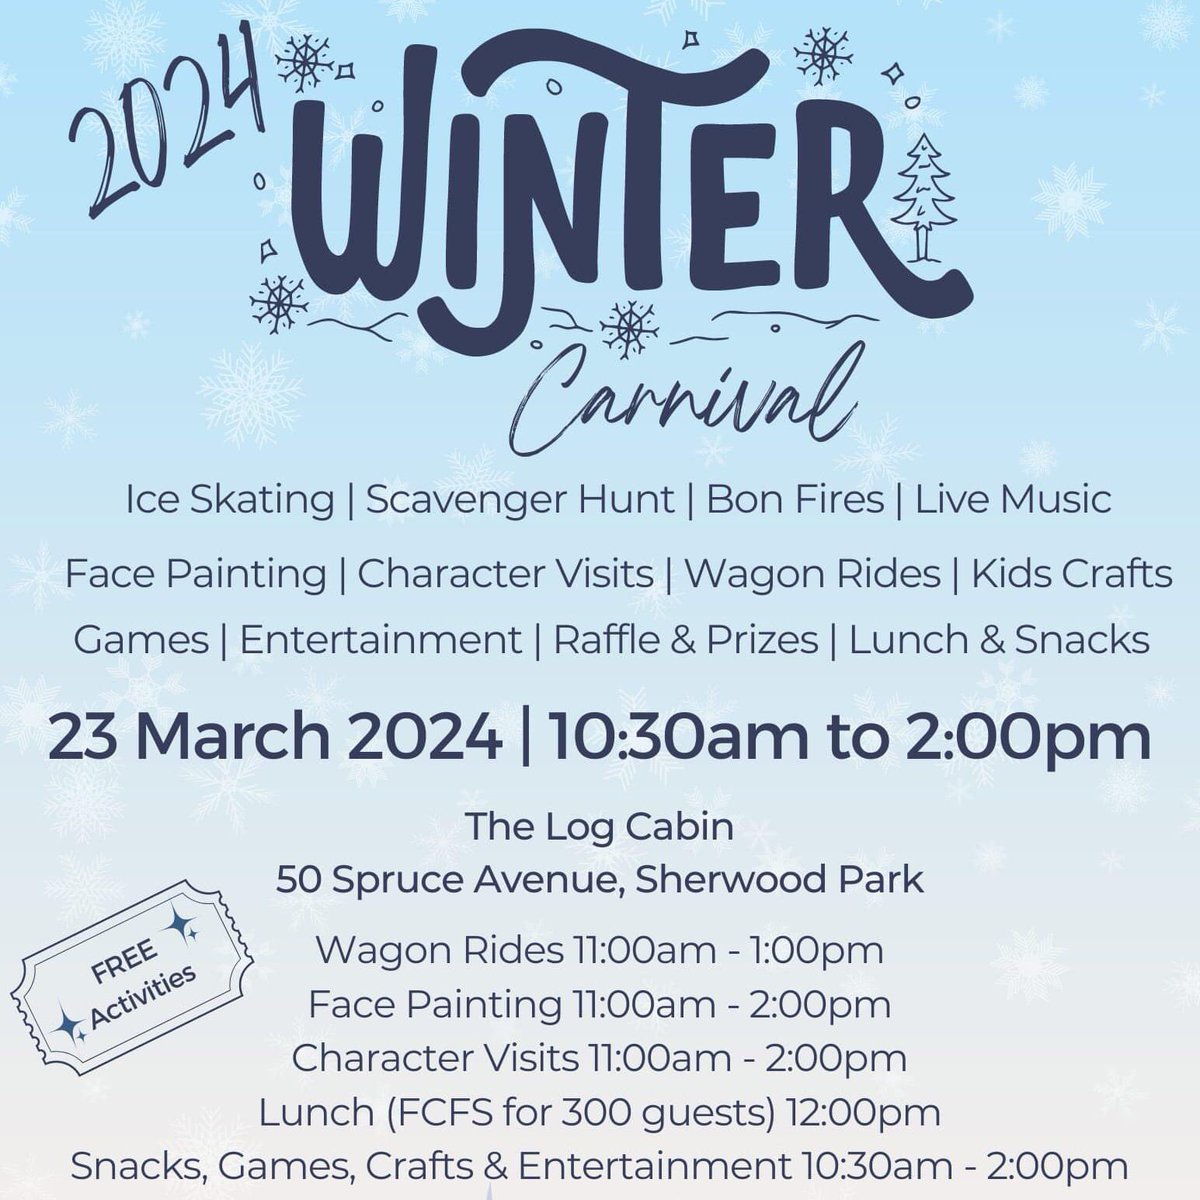 Glen Allan youth are assisting the Sherwood Heights Community League with a Winter Carnival! Check out this community building event today from 10-2pm at the Log Cabin #shpk #strathco #neighbourpower